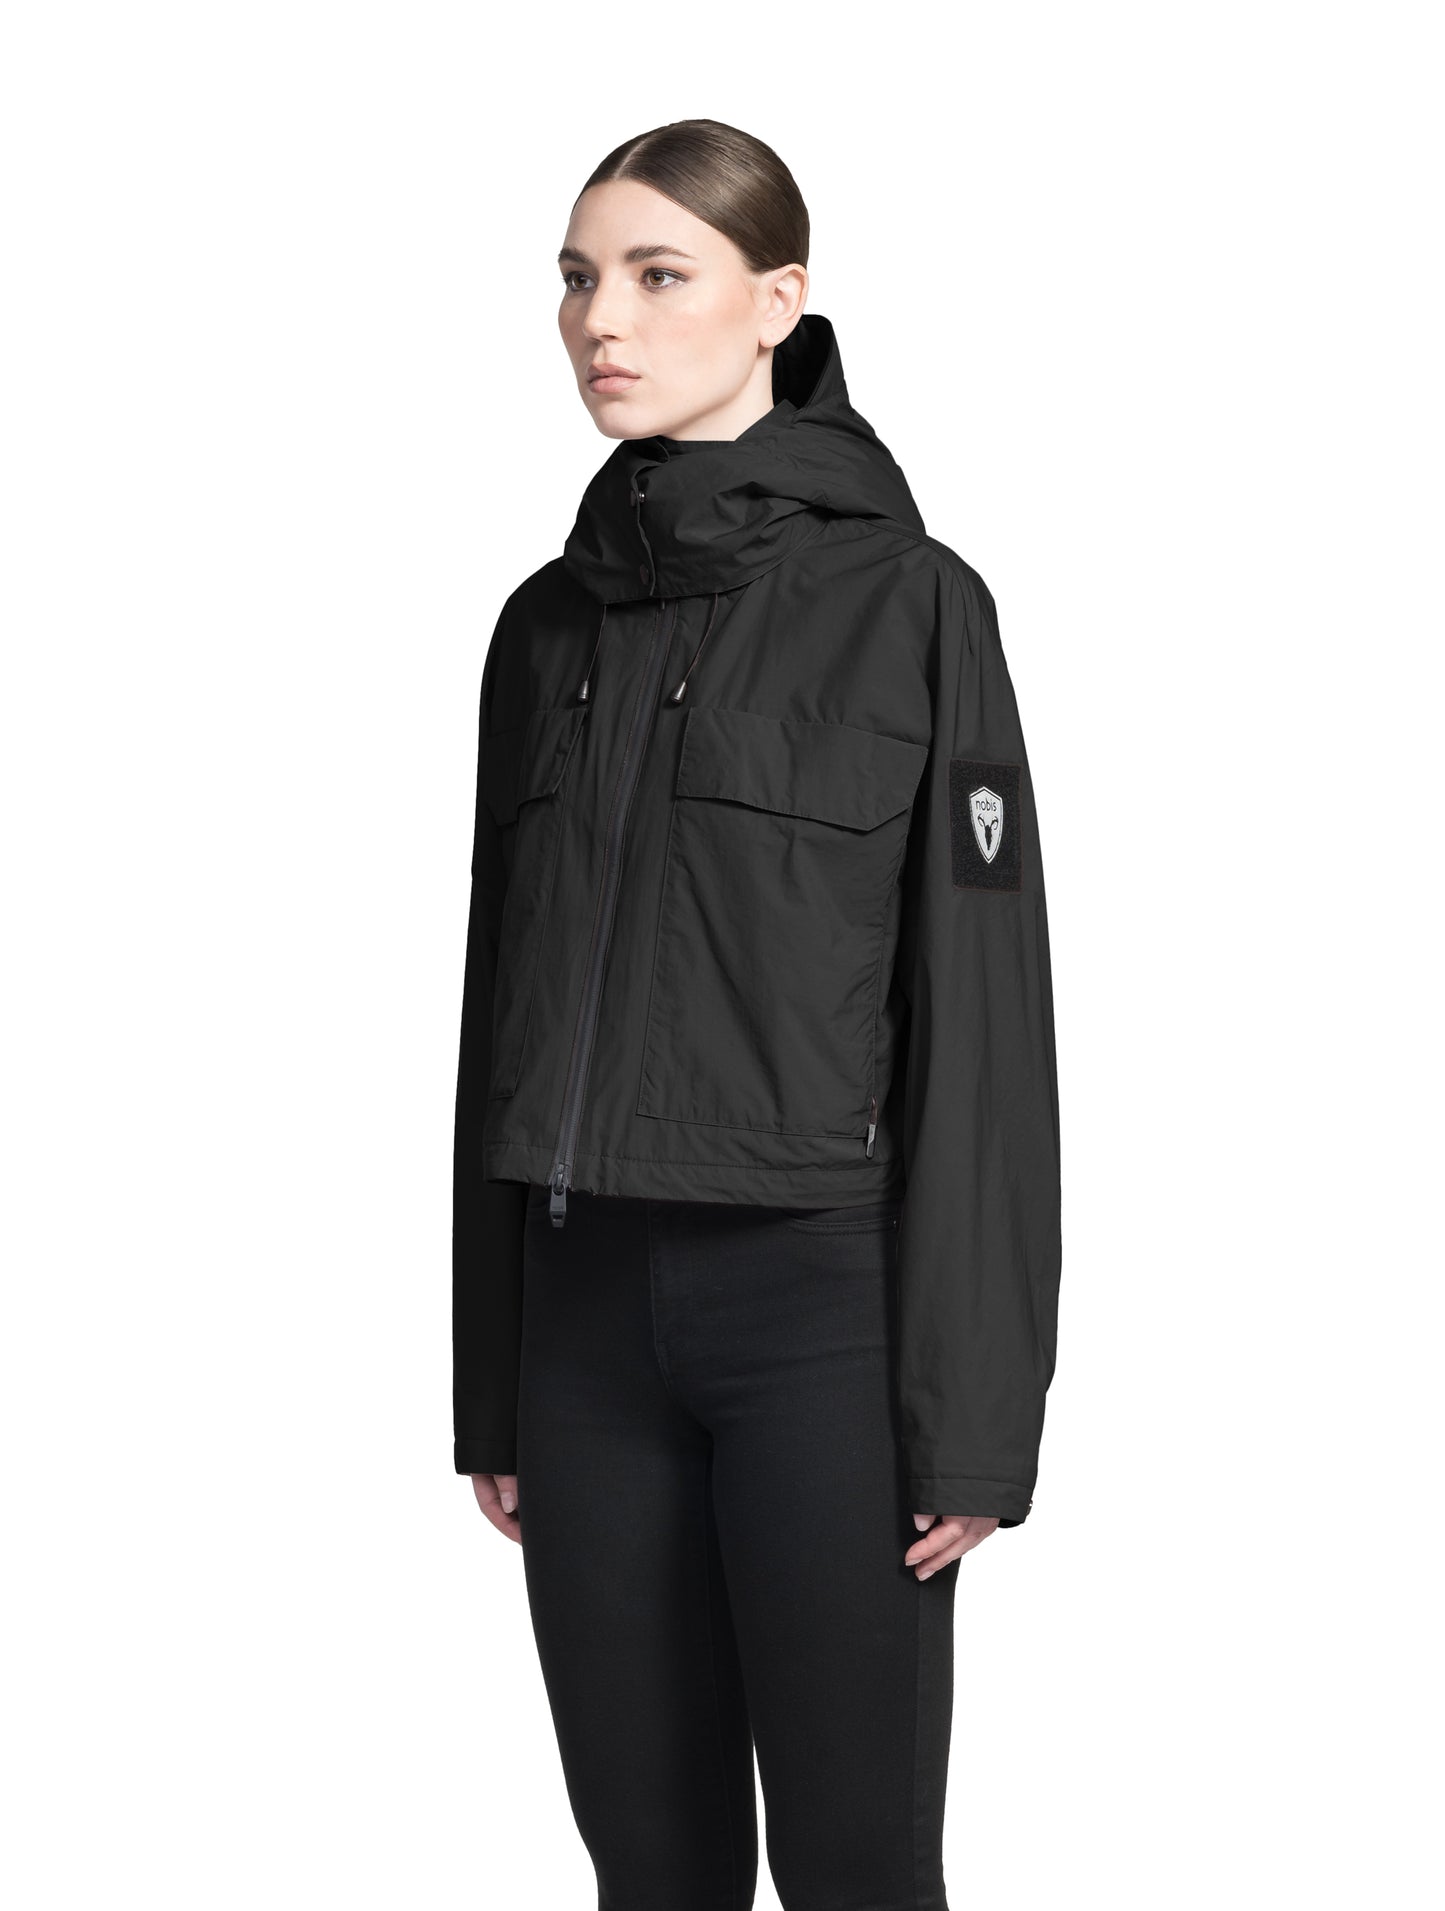 Viva Women's Performance Cropped Jacket in waist length, premium iridescent fabrication, removable hood with peak, adjustable hood draw cords and toggle, 2-way branded zipper at centre front, oversized magnetic closure flap pockets at chest with side entry, interior adjustable draw cord at hem, large interior zipper pocket, and adjustable snap cuffs, in Black